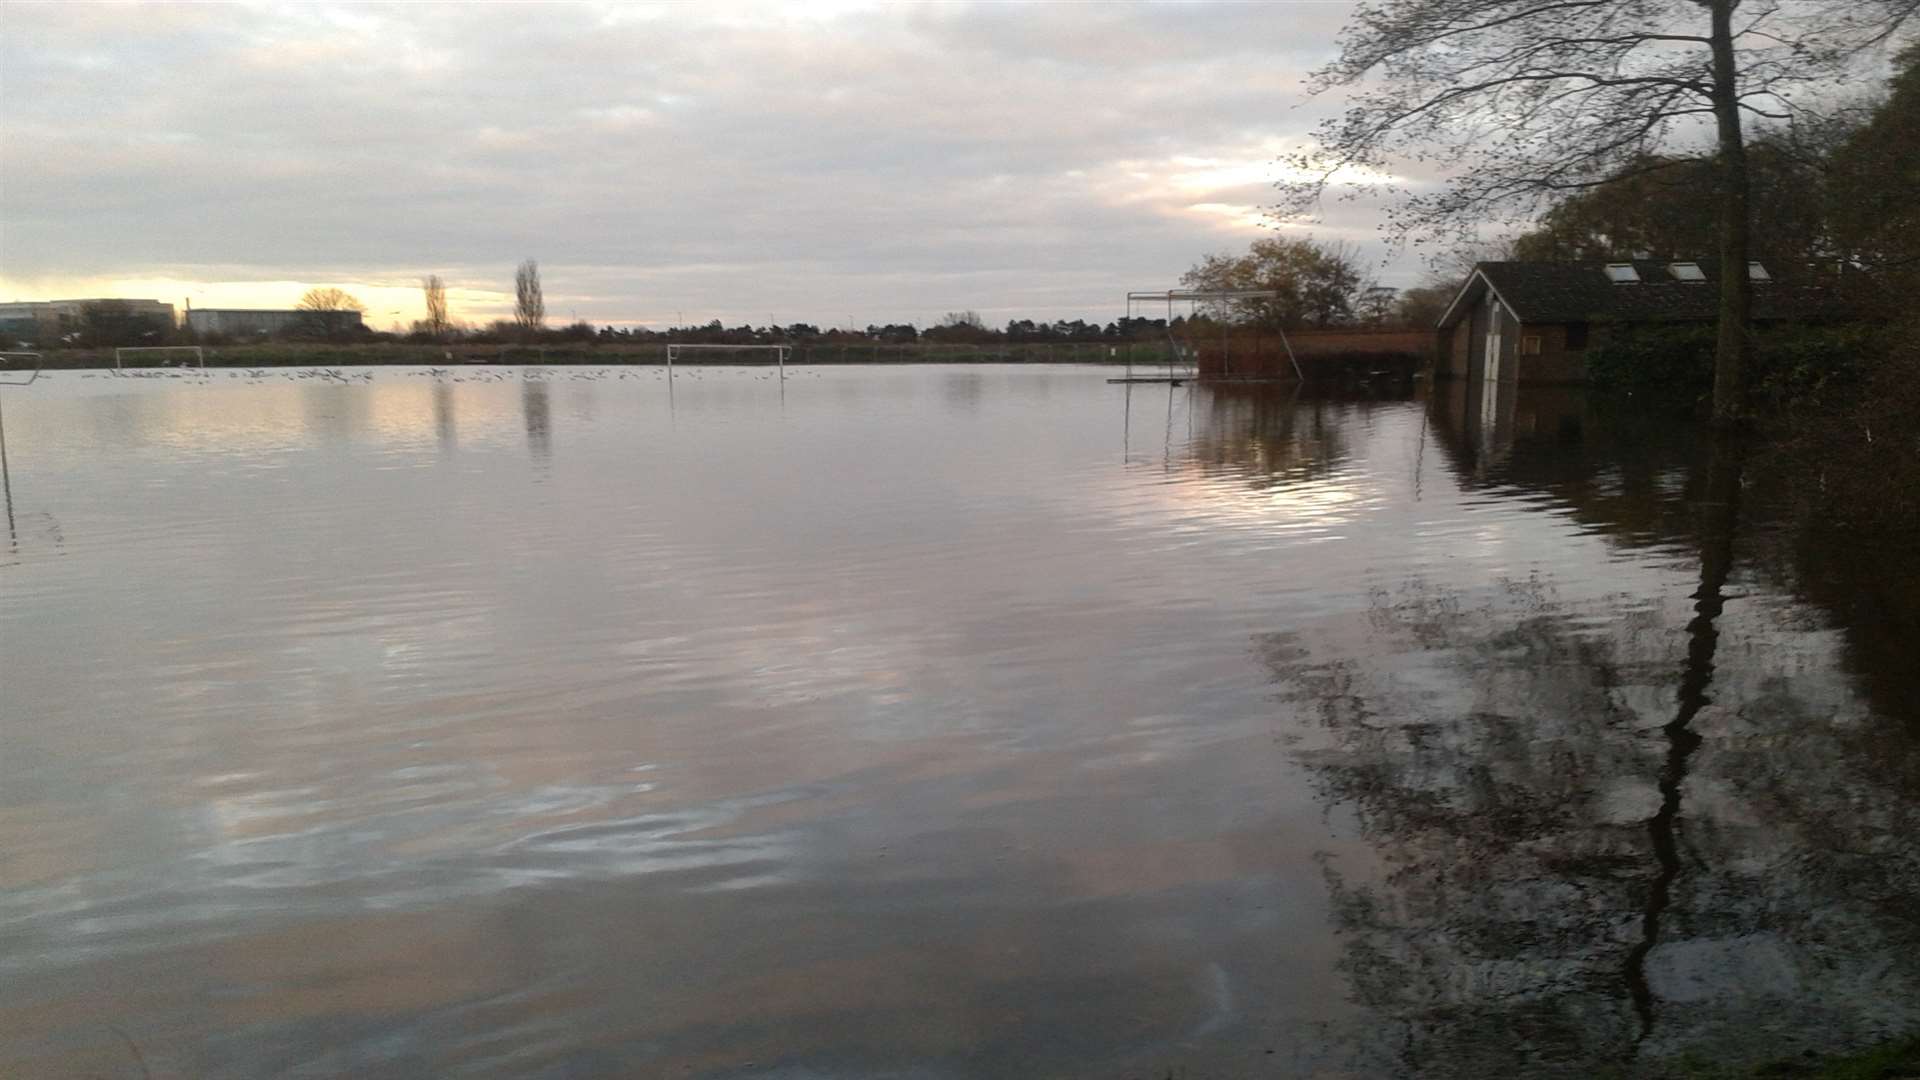 Gazen Salts Nature Reserve is still unopen following December 2013's tidal surge and could open sooner if it gets funding